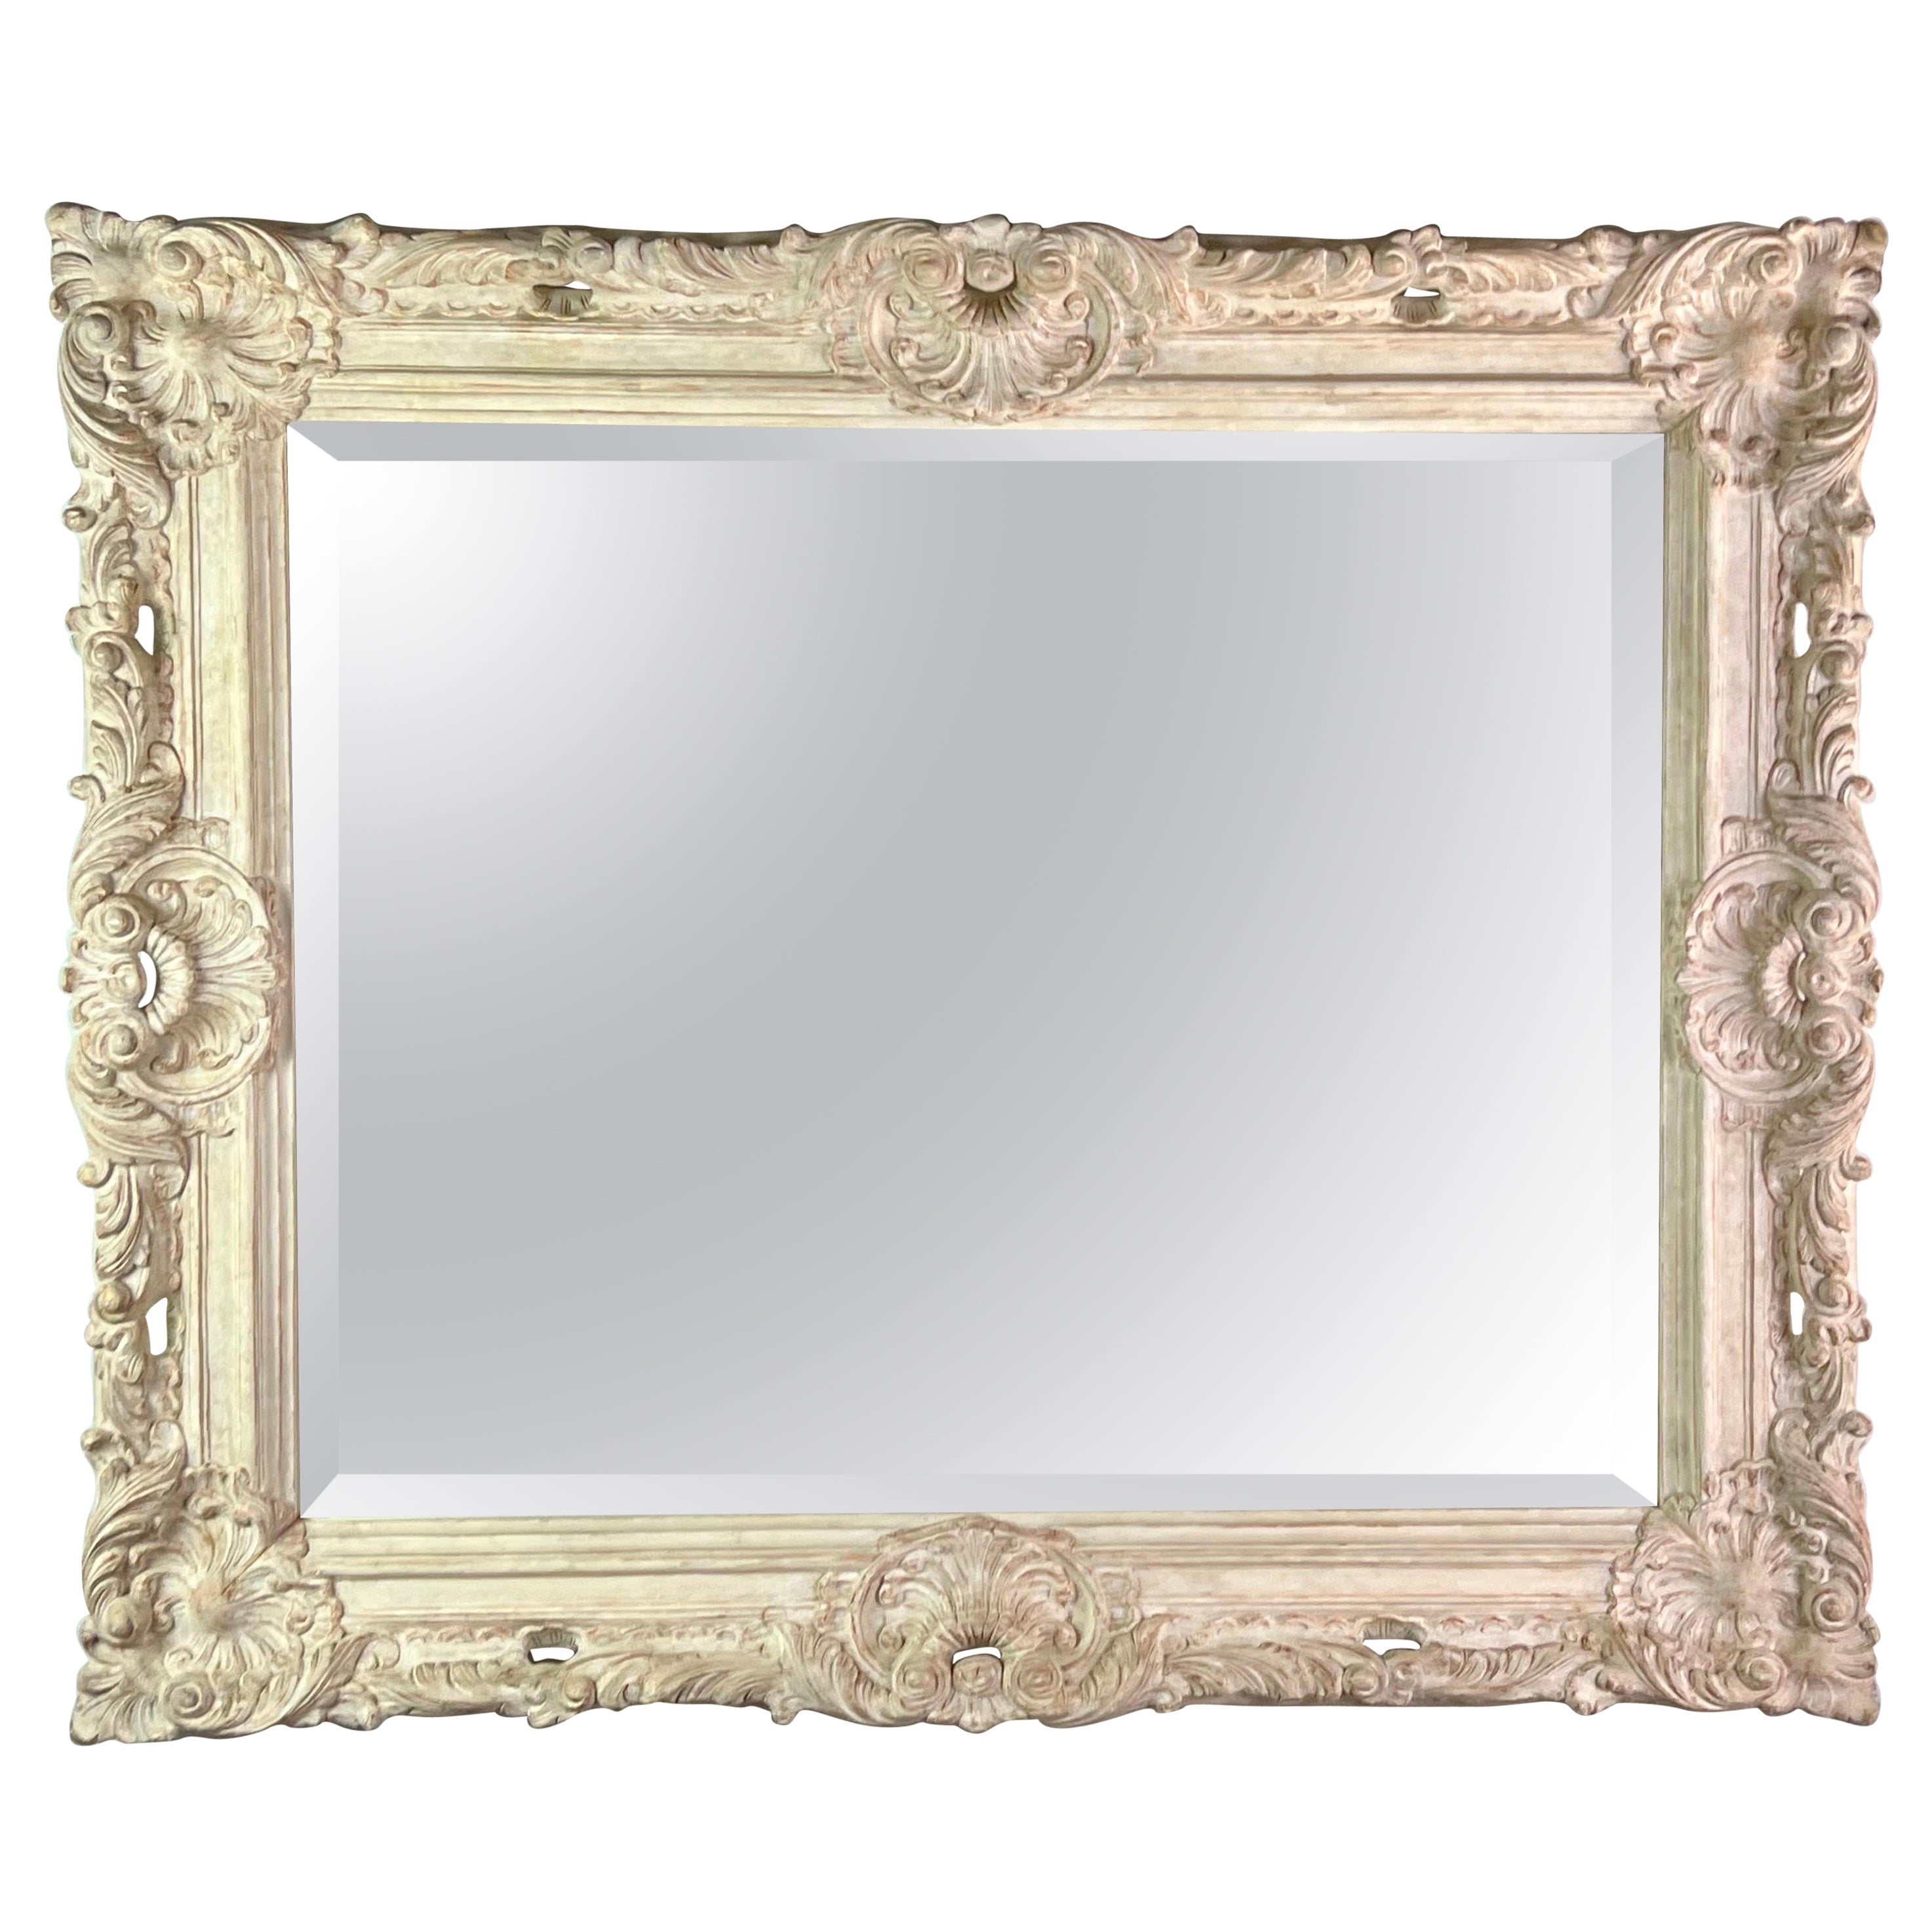 Monumental French Rococo Style Mirror